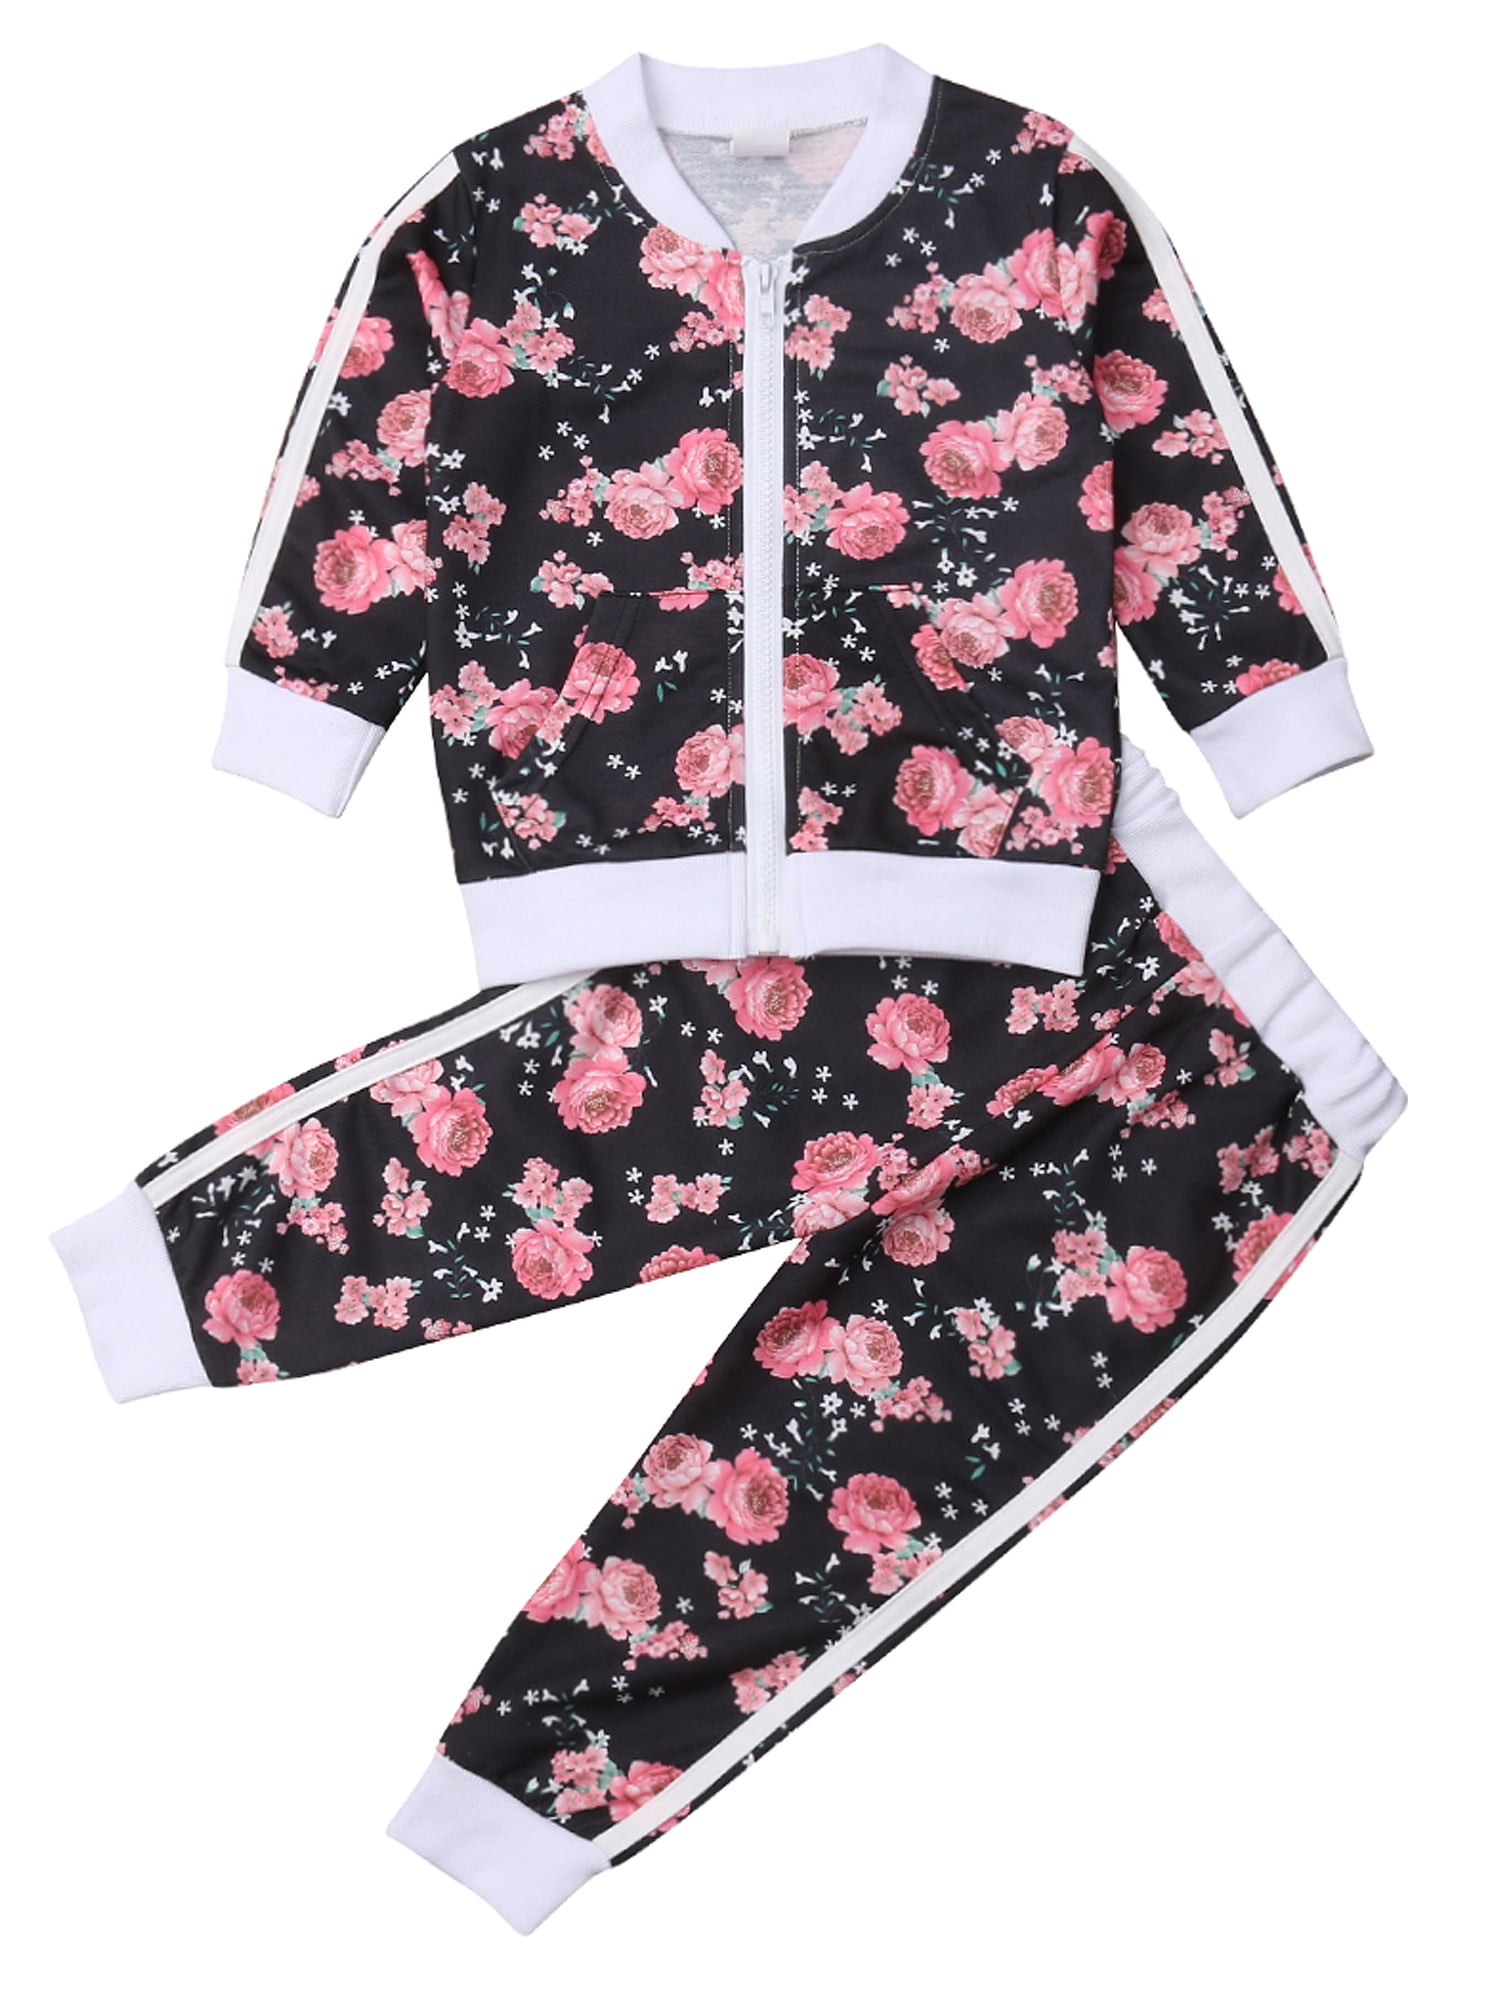 Toddler Kids Girls Flower Tracksuit Clothes Sweatshirt Shirt Tops Pants Outfits 